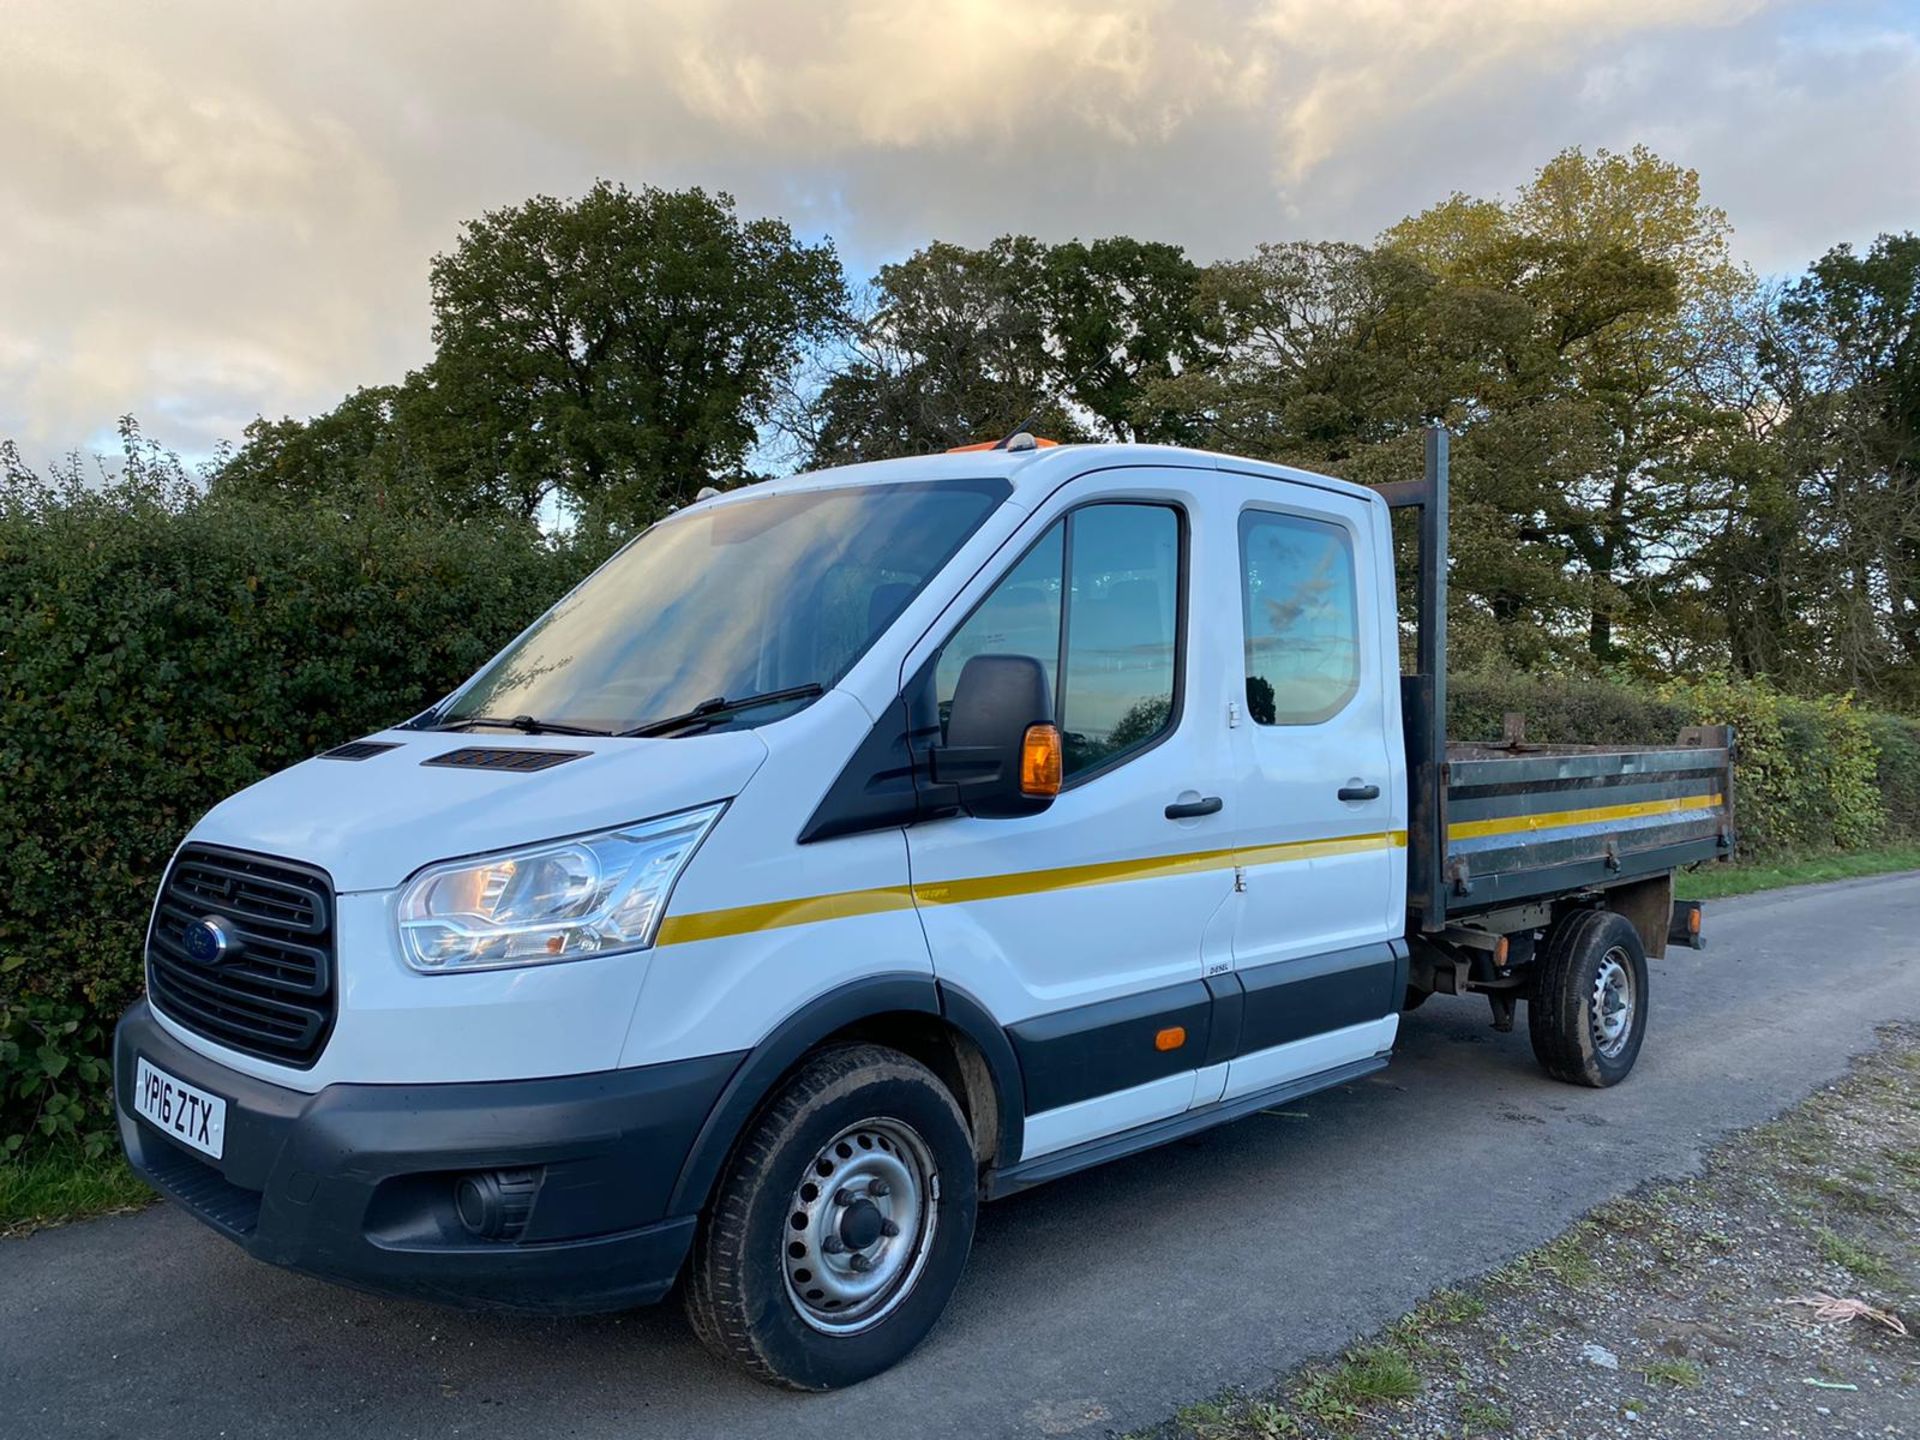 2016 FORD TRANSIT 350 TIPPER 47000 MILES LOCATION NORTH YORKSHIRE.